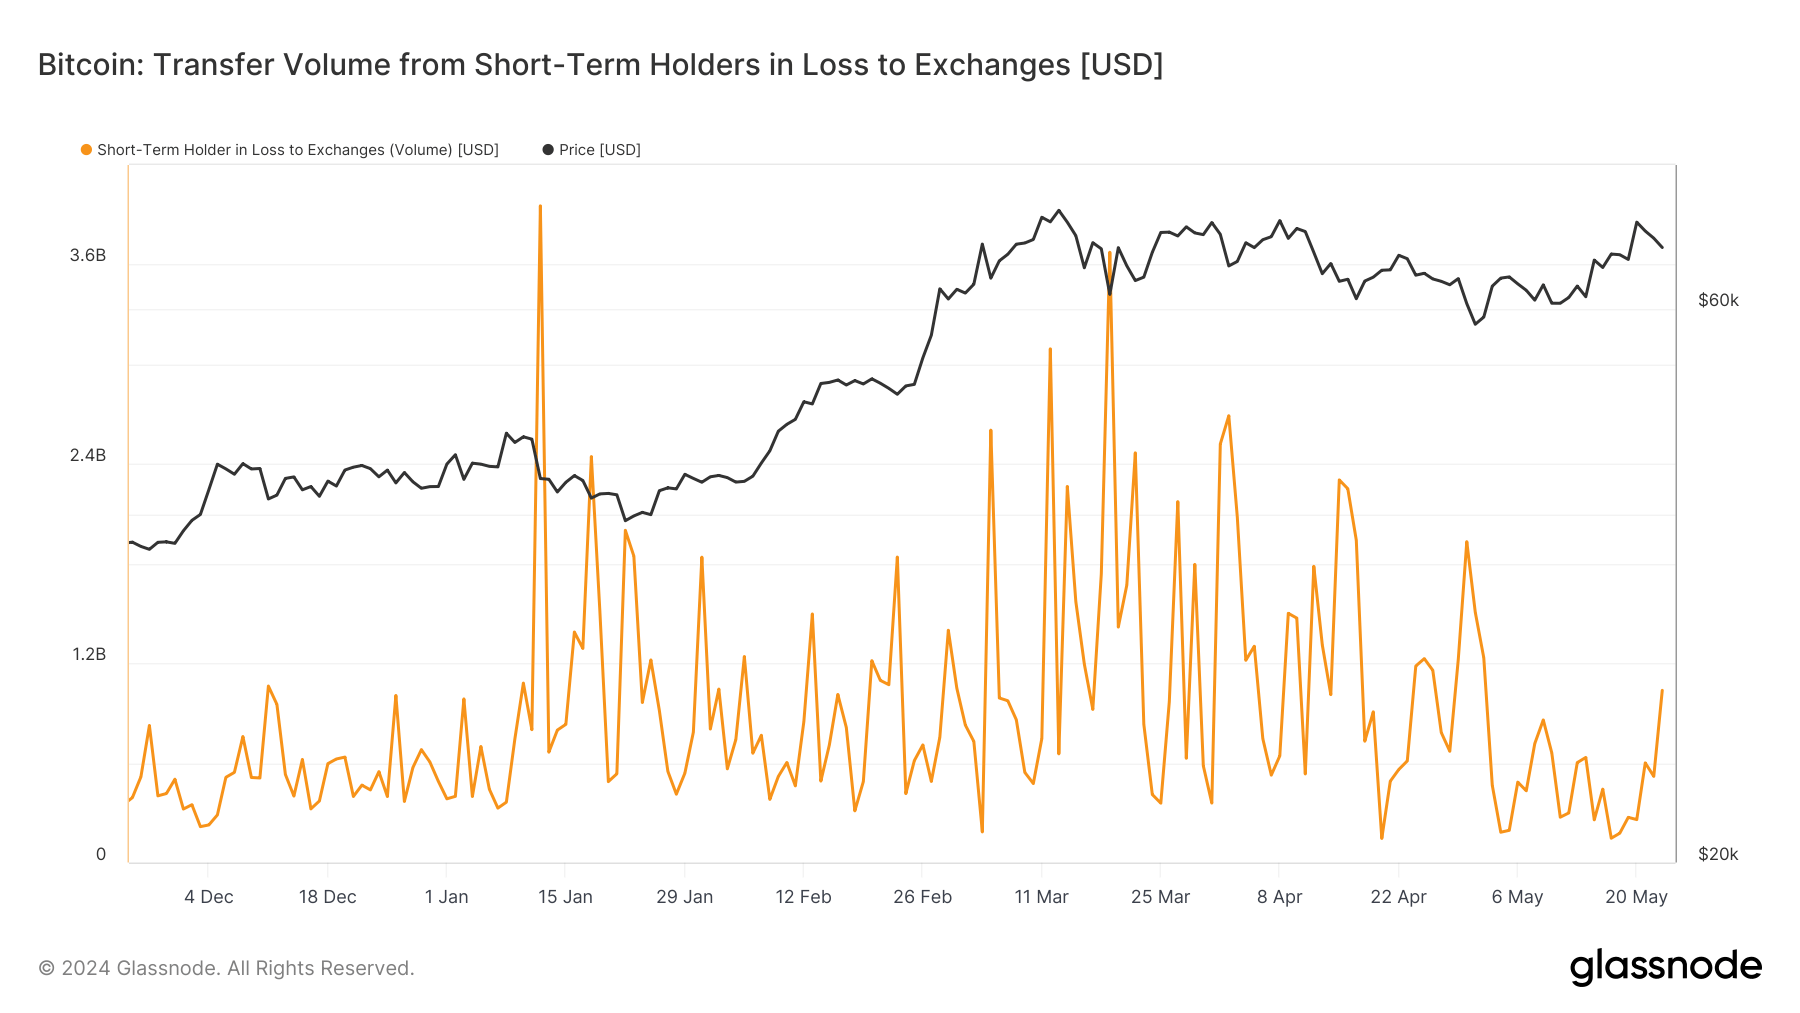 Market volatility triggers $1 billion worth of Bitcoin sent to exchanges at a loss by short-term holders